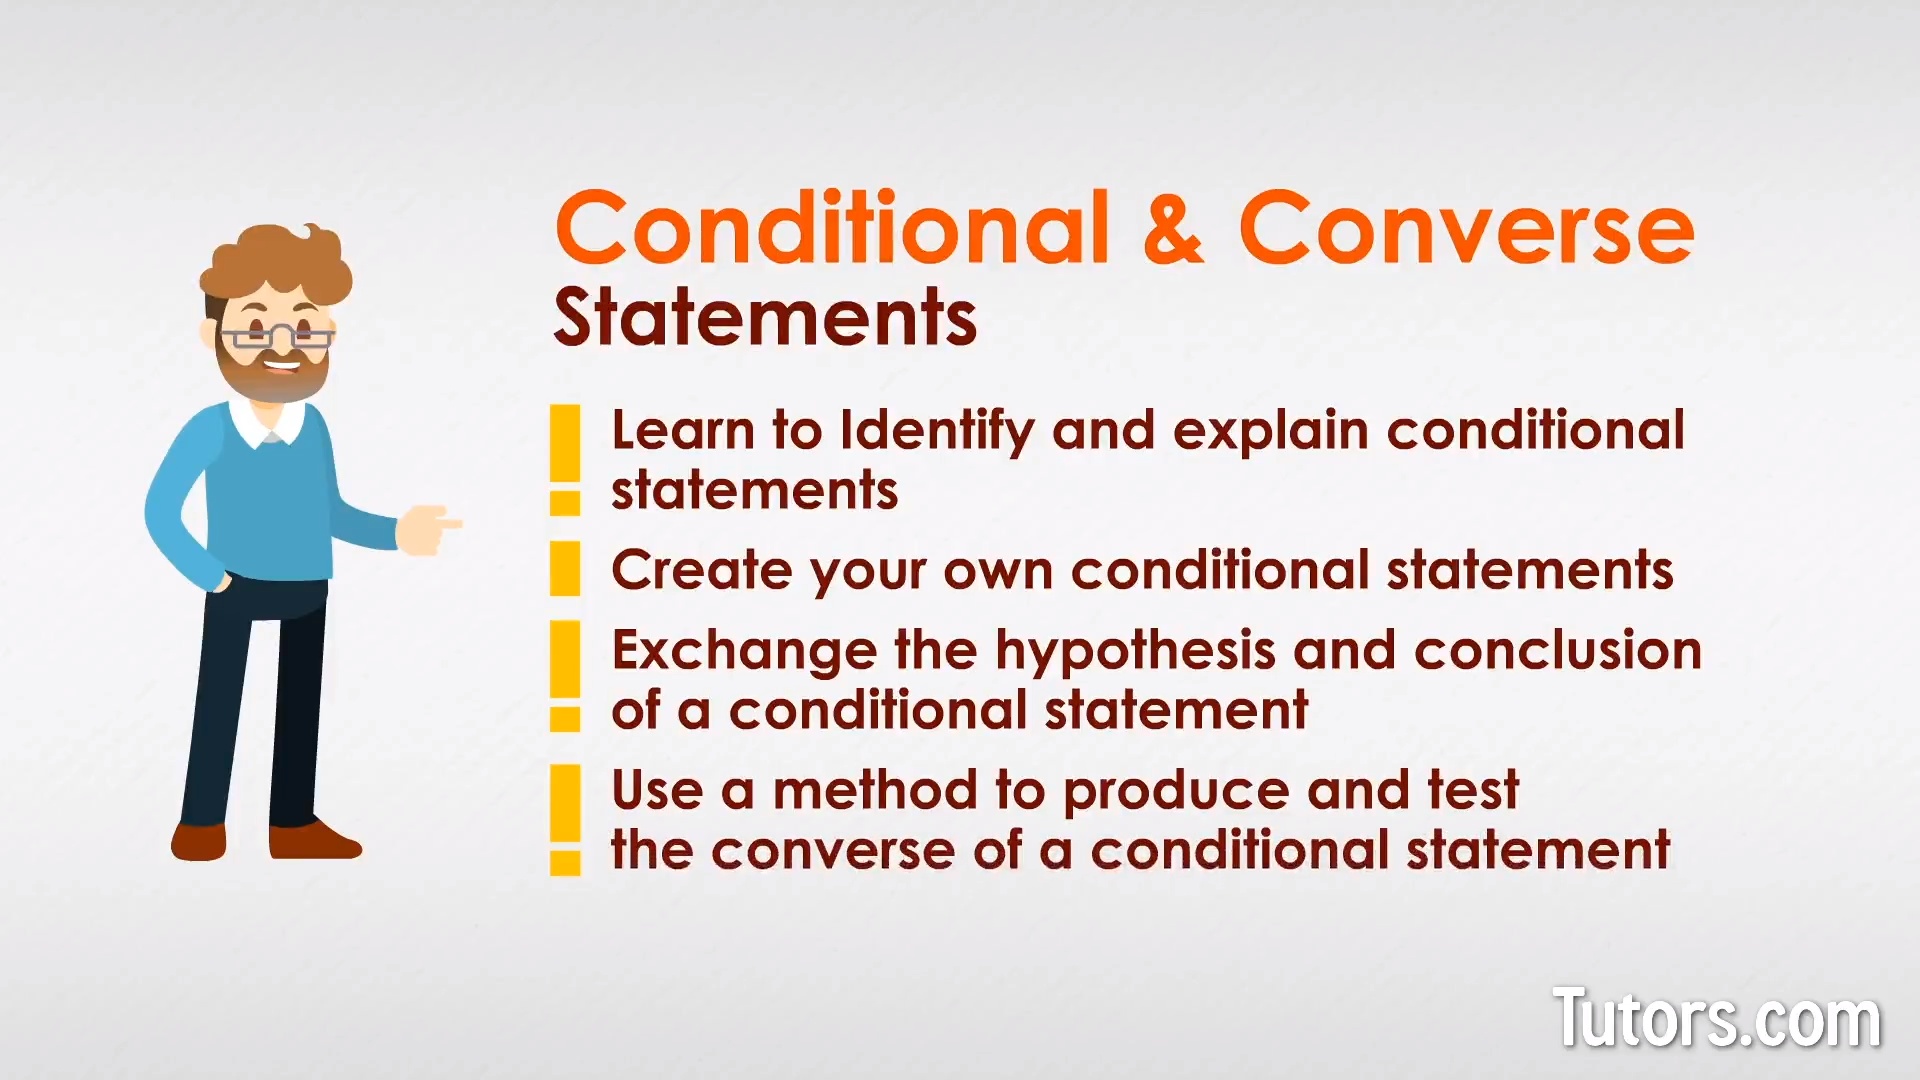 Conditionals 2 3 упражнения. Converse of Statement. Converse meaning. Conversion examples.